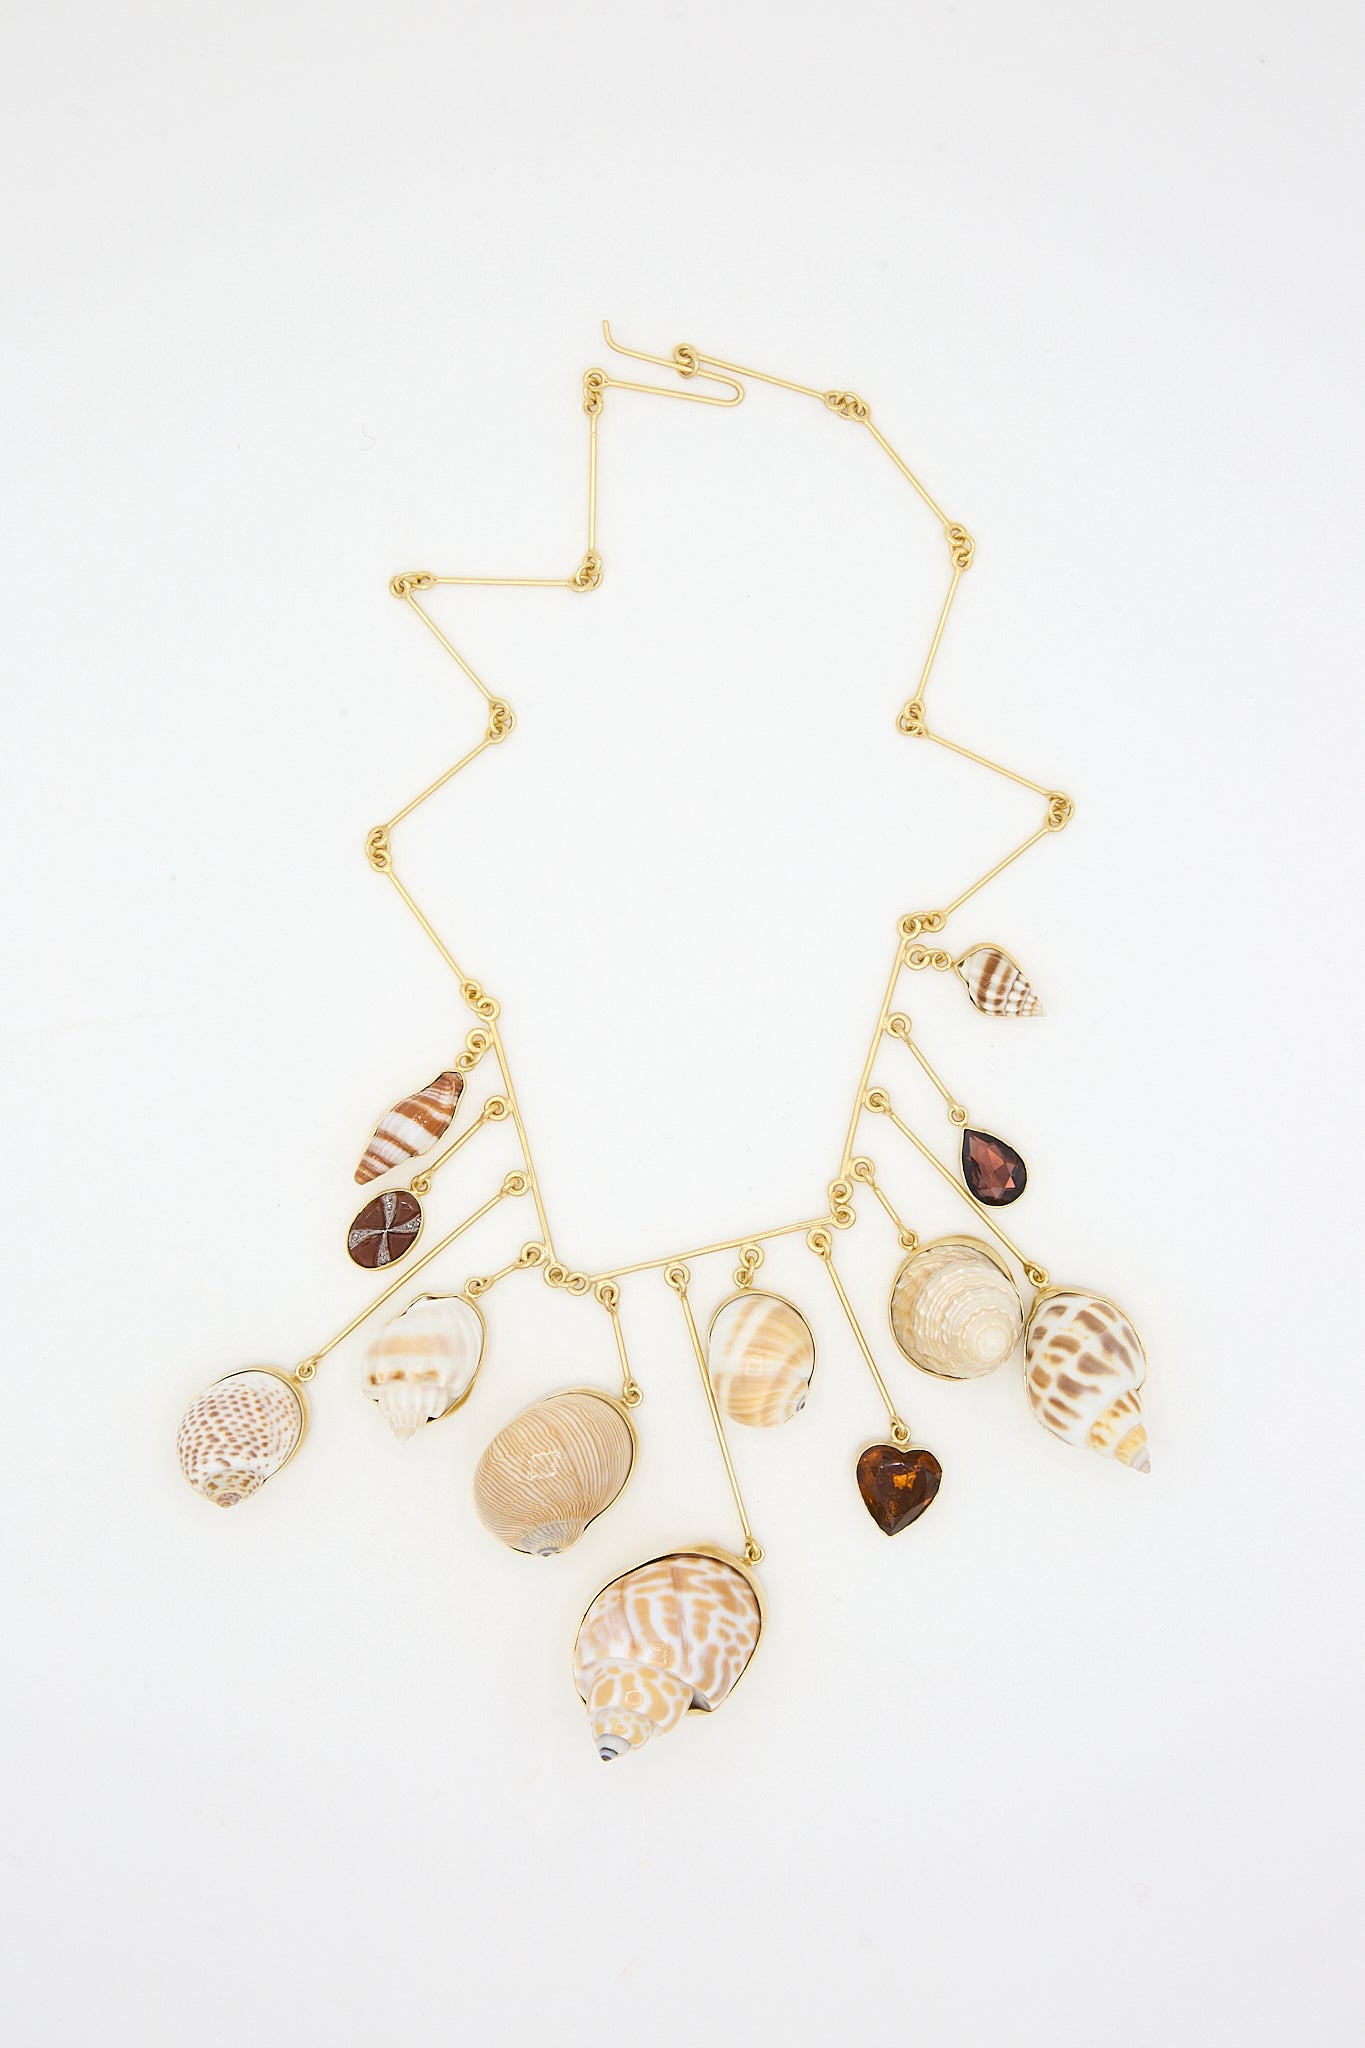 A Wire Charm Drop Necklace with shells, Carnelian beads, and 18k gold-plated silver on it by Grainne Morton.